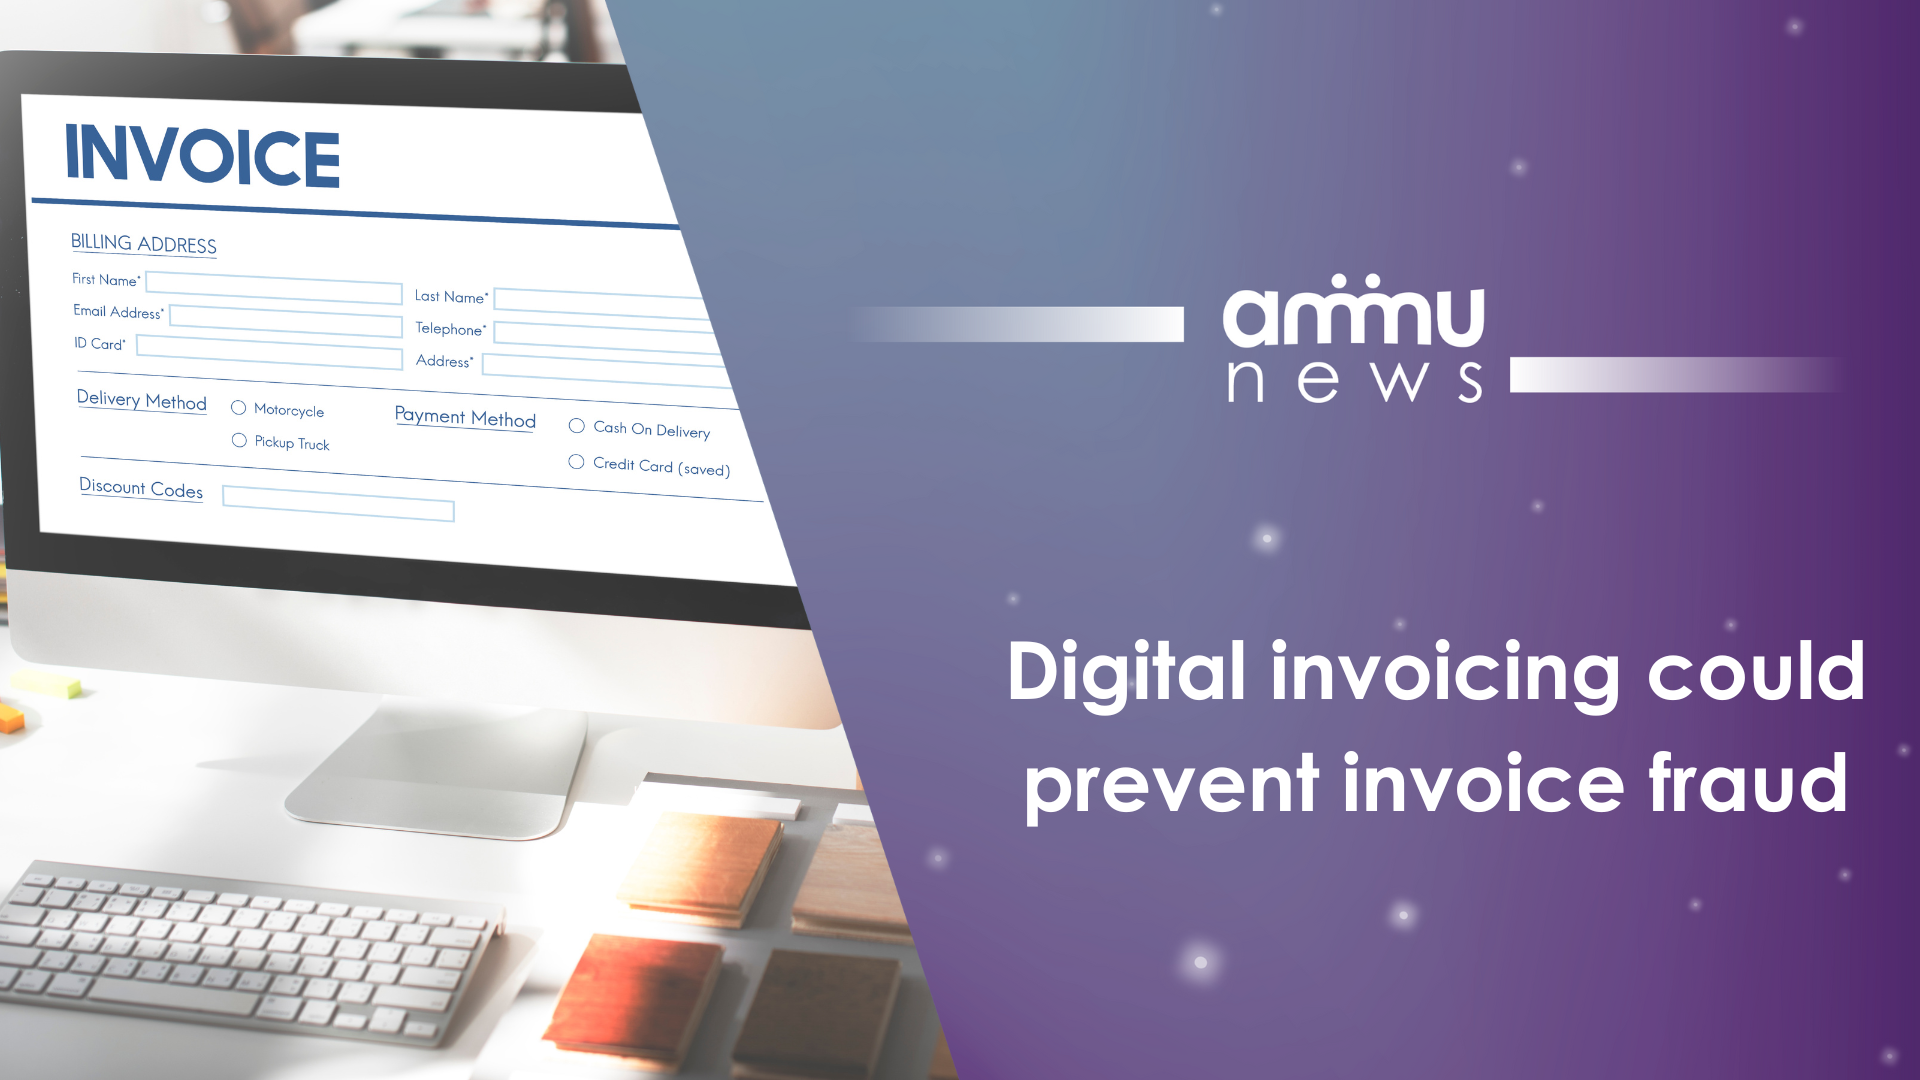 Digital invoicing could prevent invoice fraud